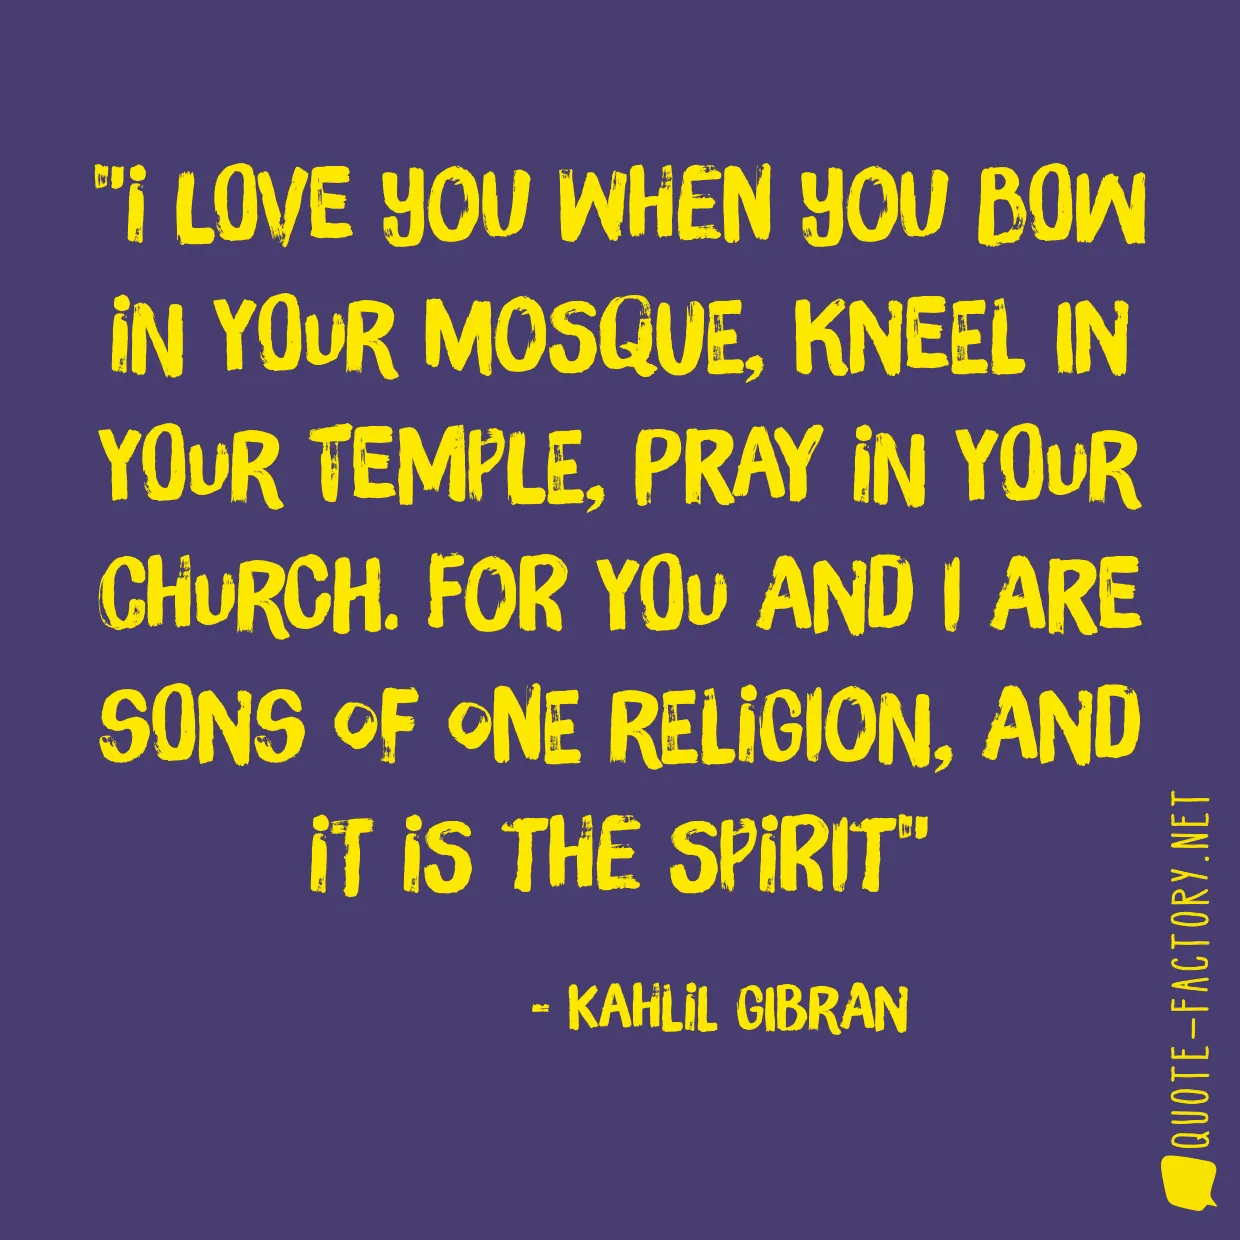 I love you when you bow in your mosque, kneel in your temple, pray in your church. For you and I are sons of one religion, and it is the spirit